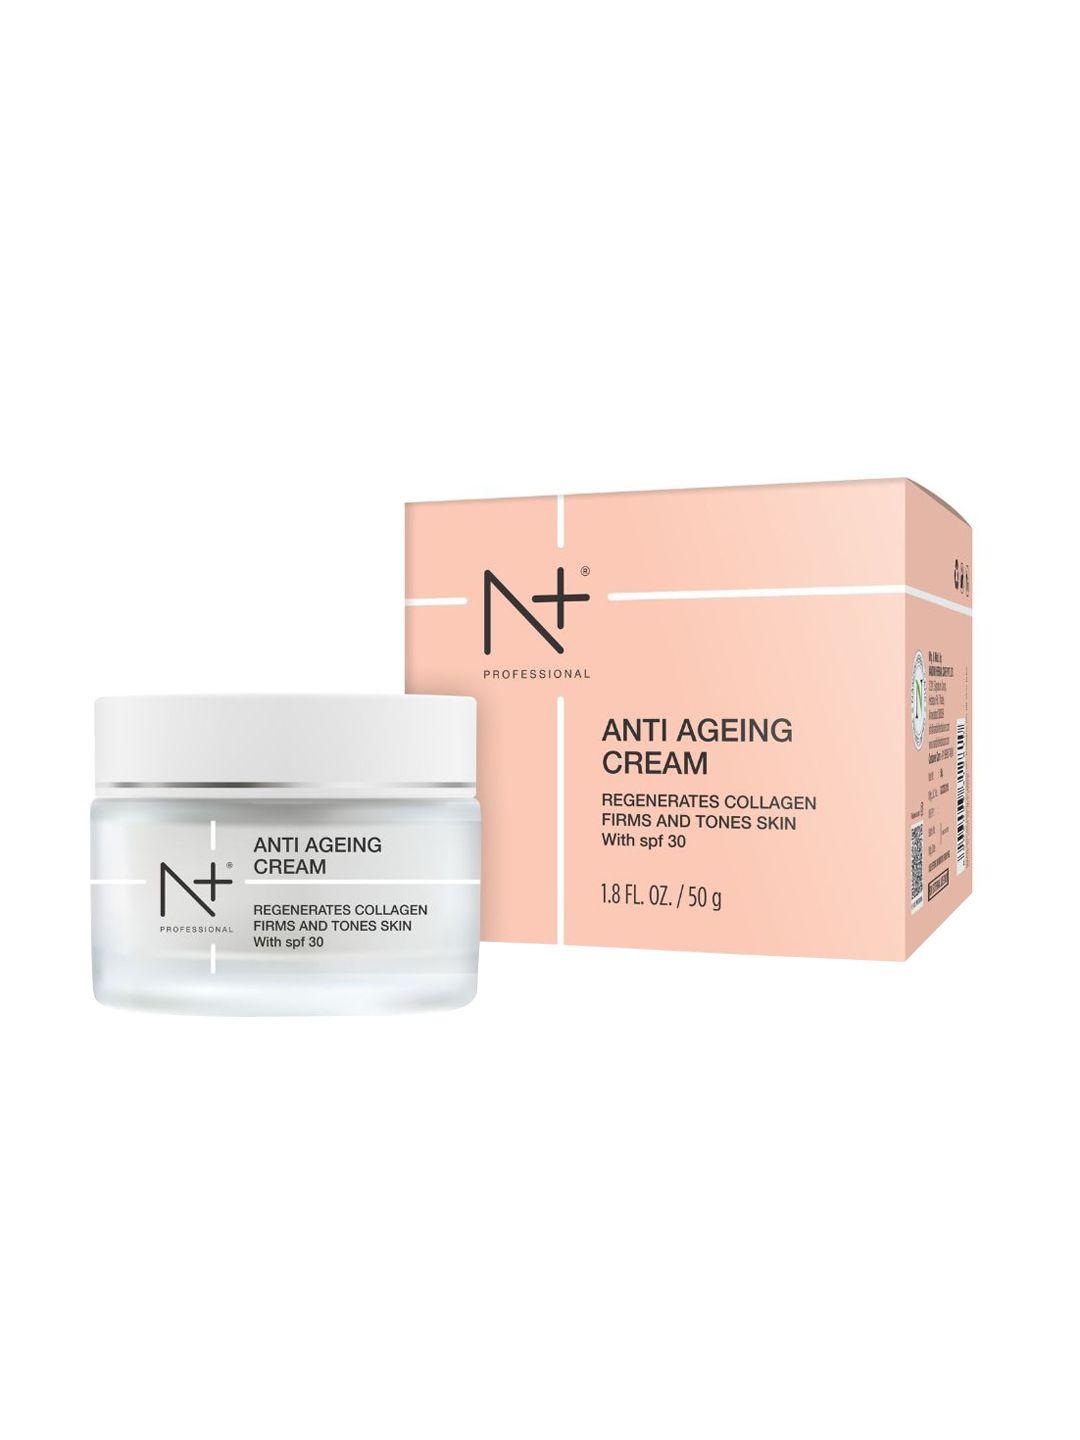 n plus professional anti ageing cream with spf30 50g